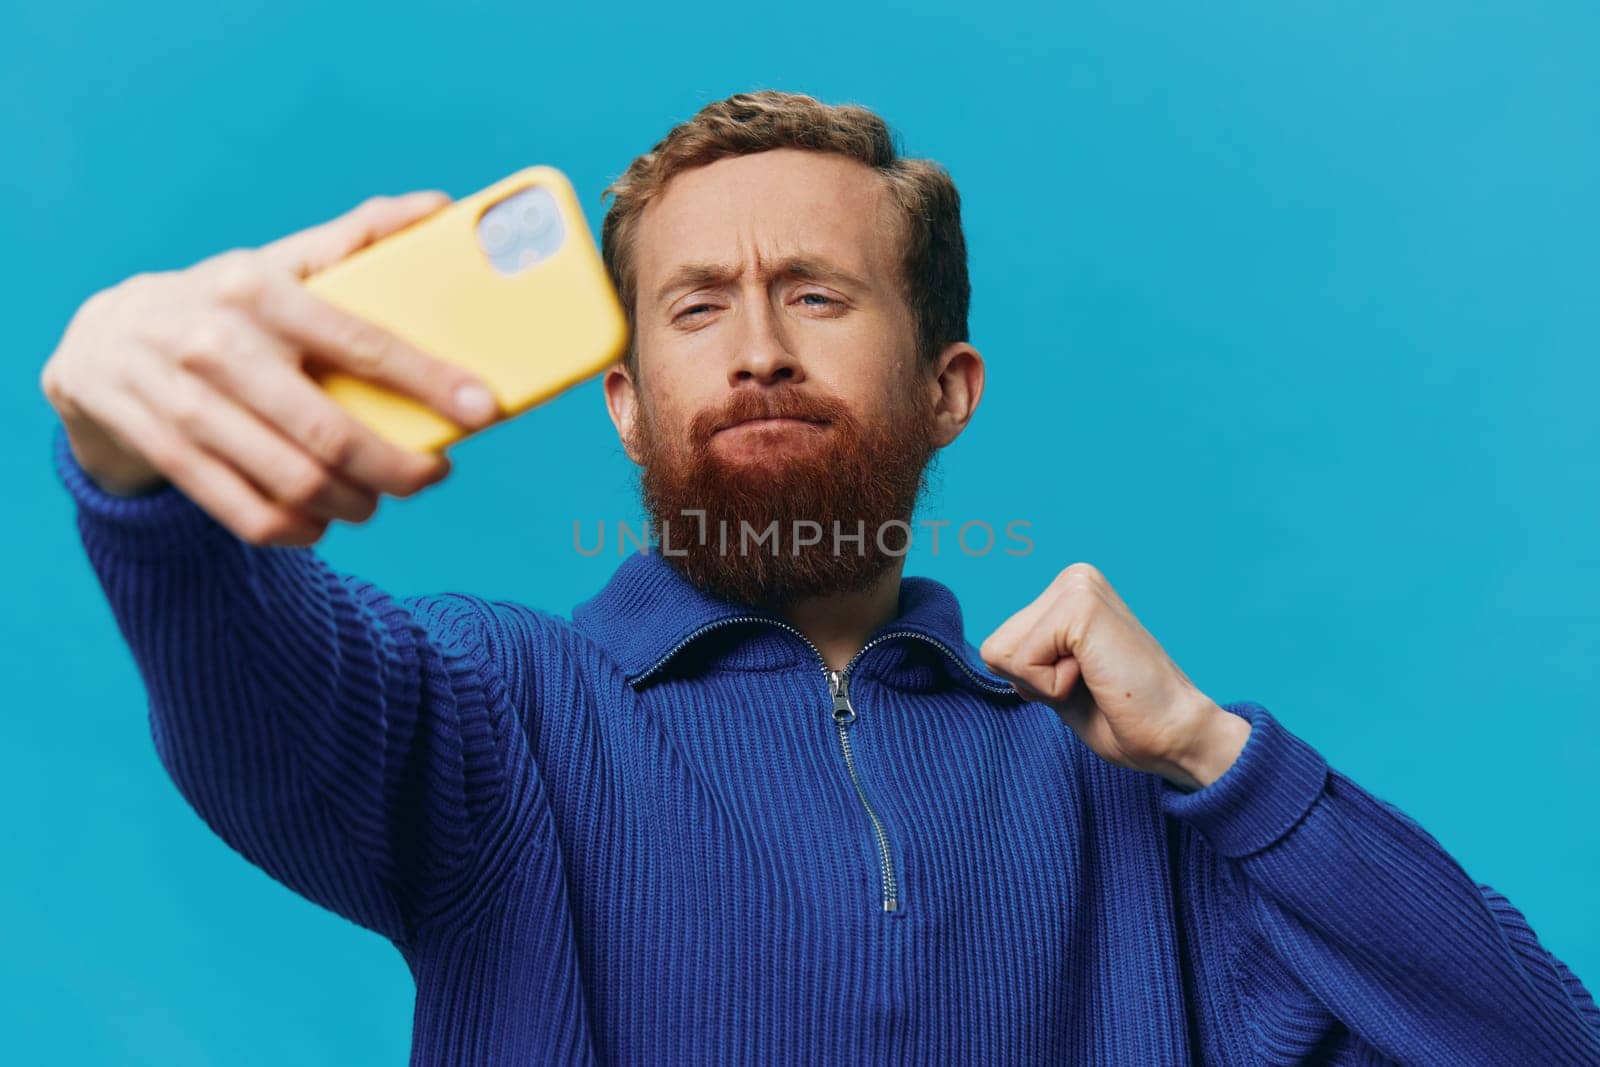 Portrait of a man with a phone in his hands blogger takes selfies, on a blue background. Communicating online social media, lifestyle by SHOTPRIME